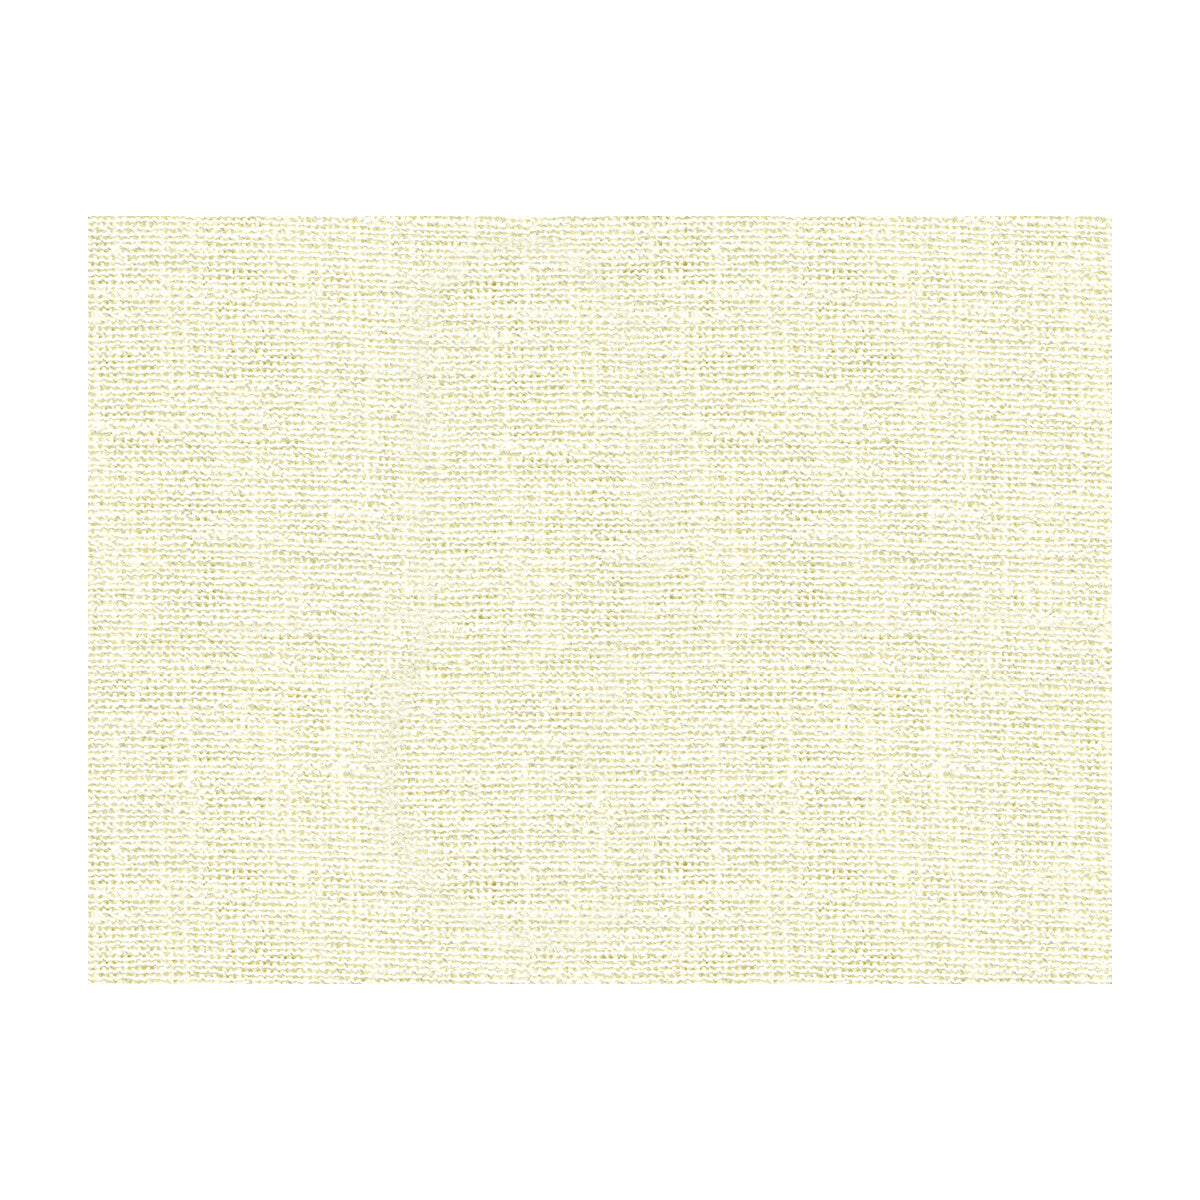 Dappled Boucle fabric in creme color - pattern 3977.1.0 - by Kravet Couture in the Michael Berman II Collection collection